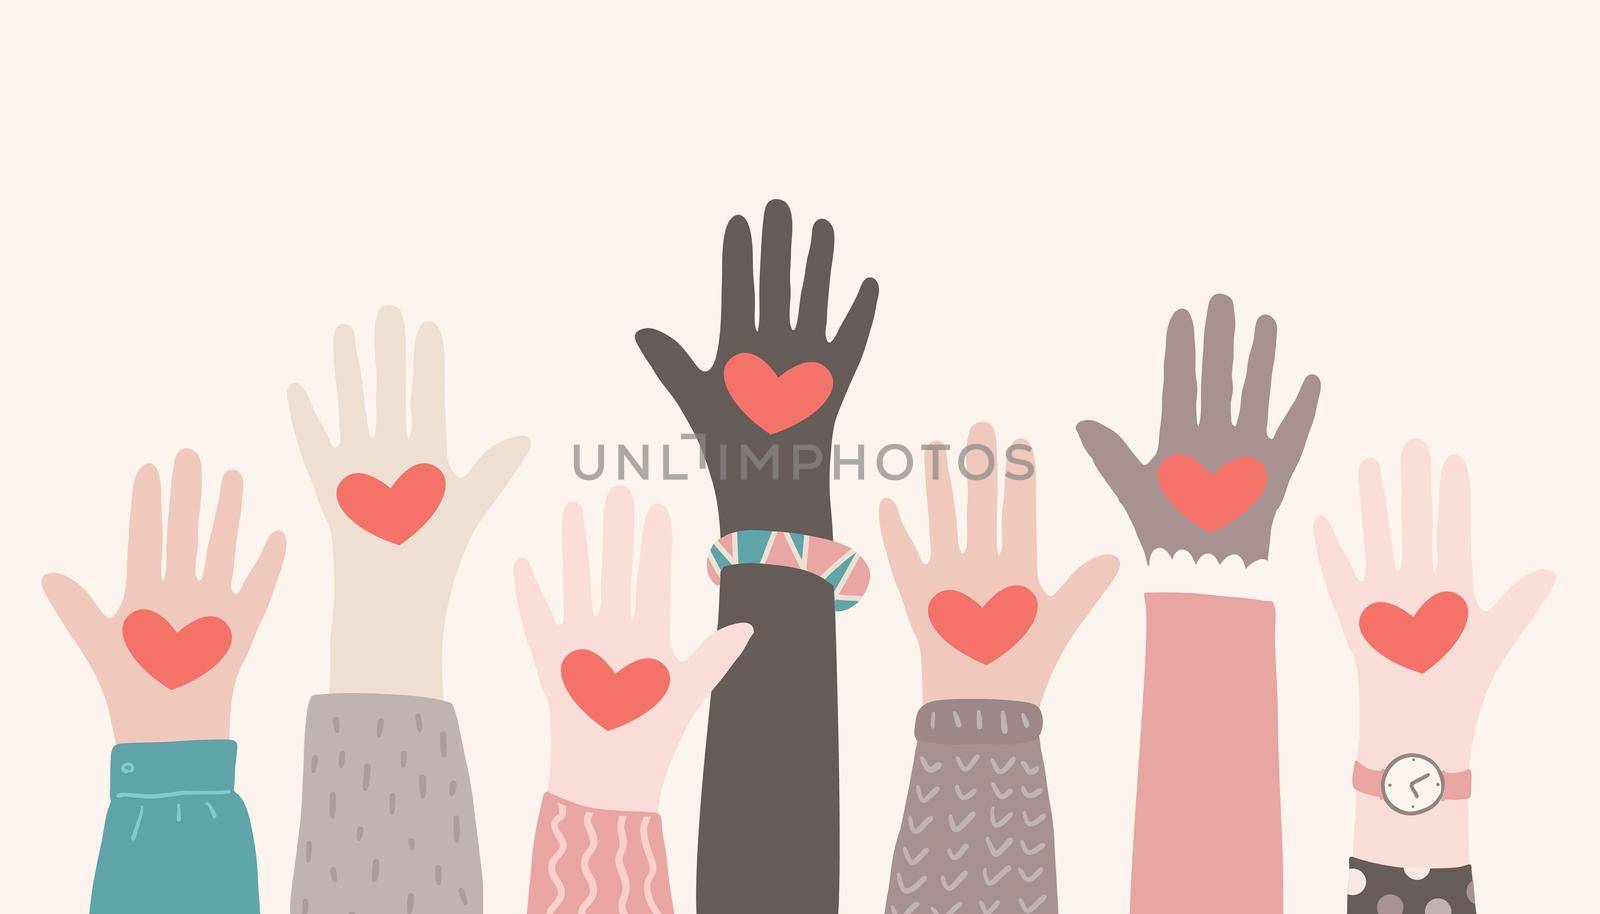 Raised hands volunteering. Charity partnership concept. Multiracial hands with hearts reaching up. Vector illuststration